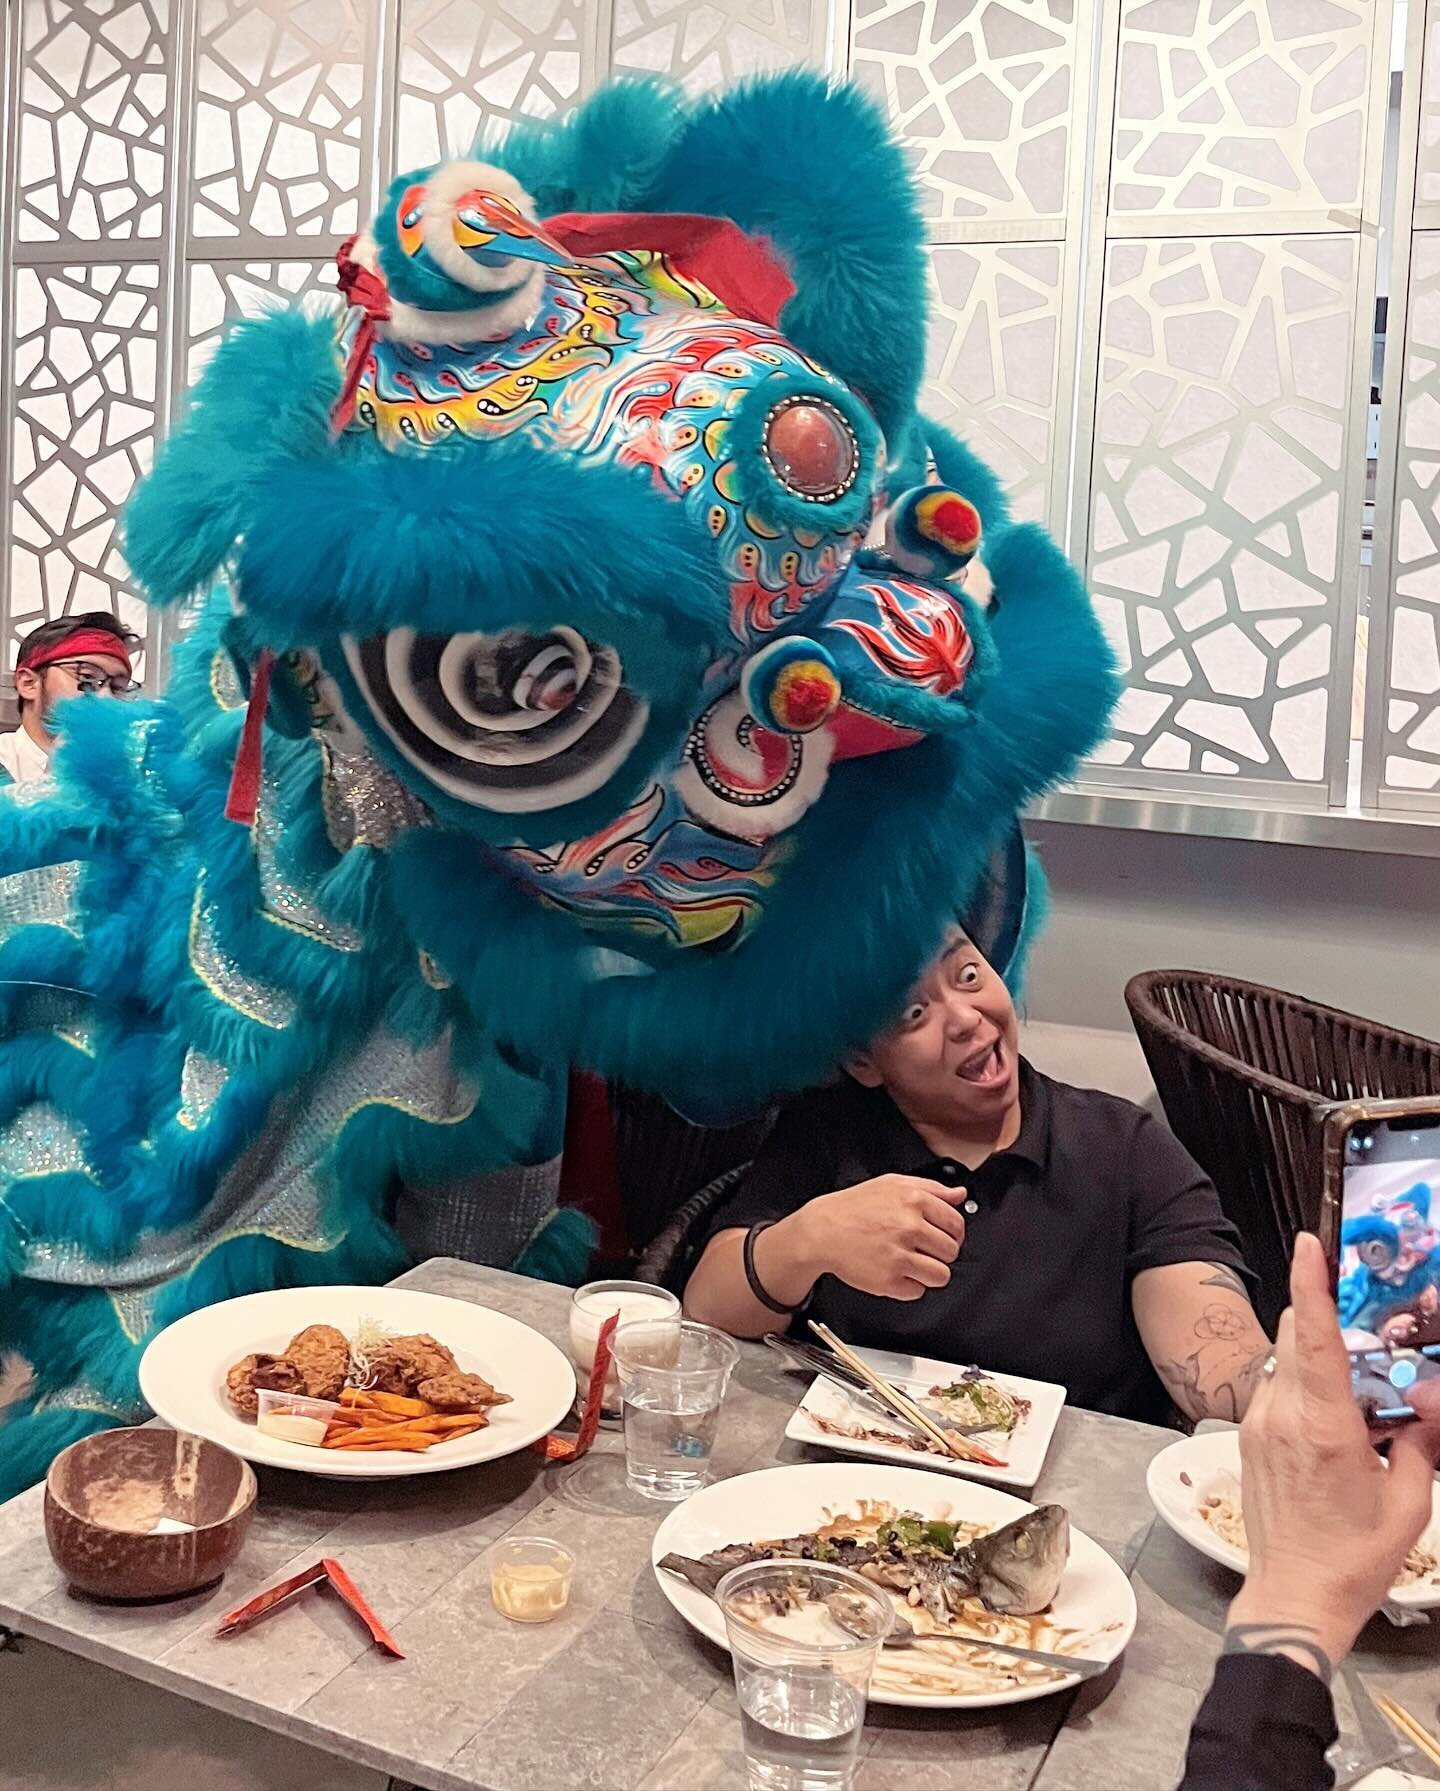 When a dragon had me for dinner (at dinner). 😎

Always happy to support @istoryalv &lsquo;s pop up dinners - I swear, the experience just keeps getting better and better every time.  Mabuhay!  And thank you for putting Filipino food and culture in t